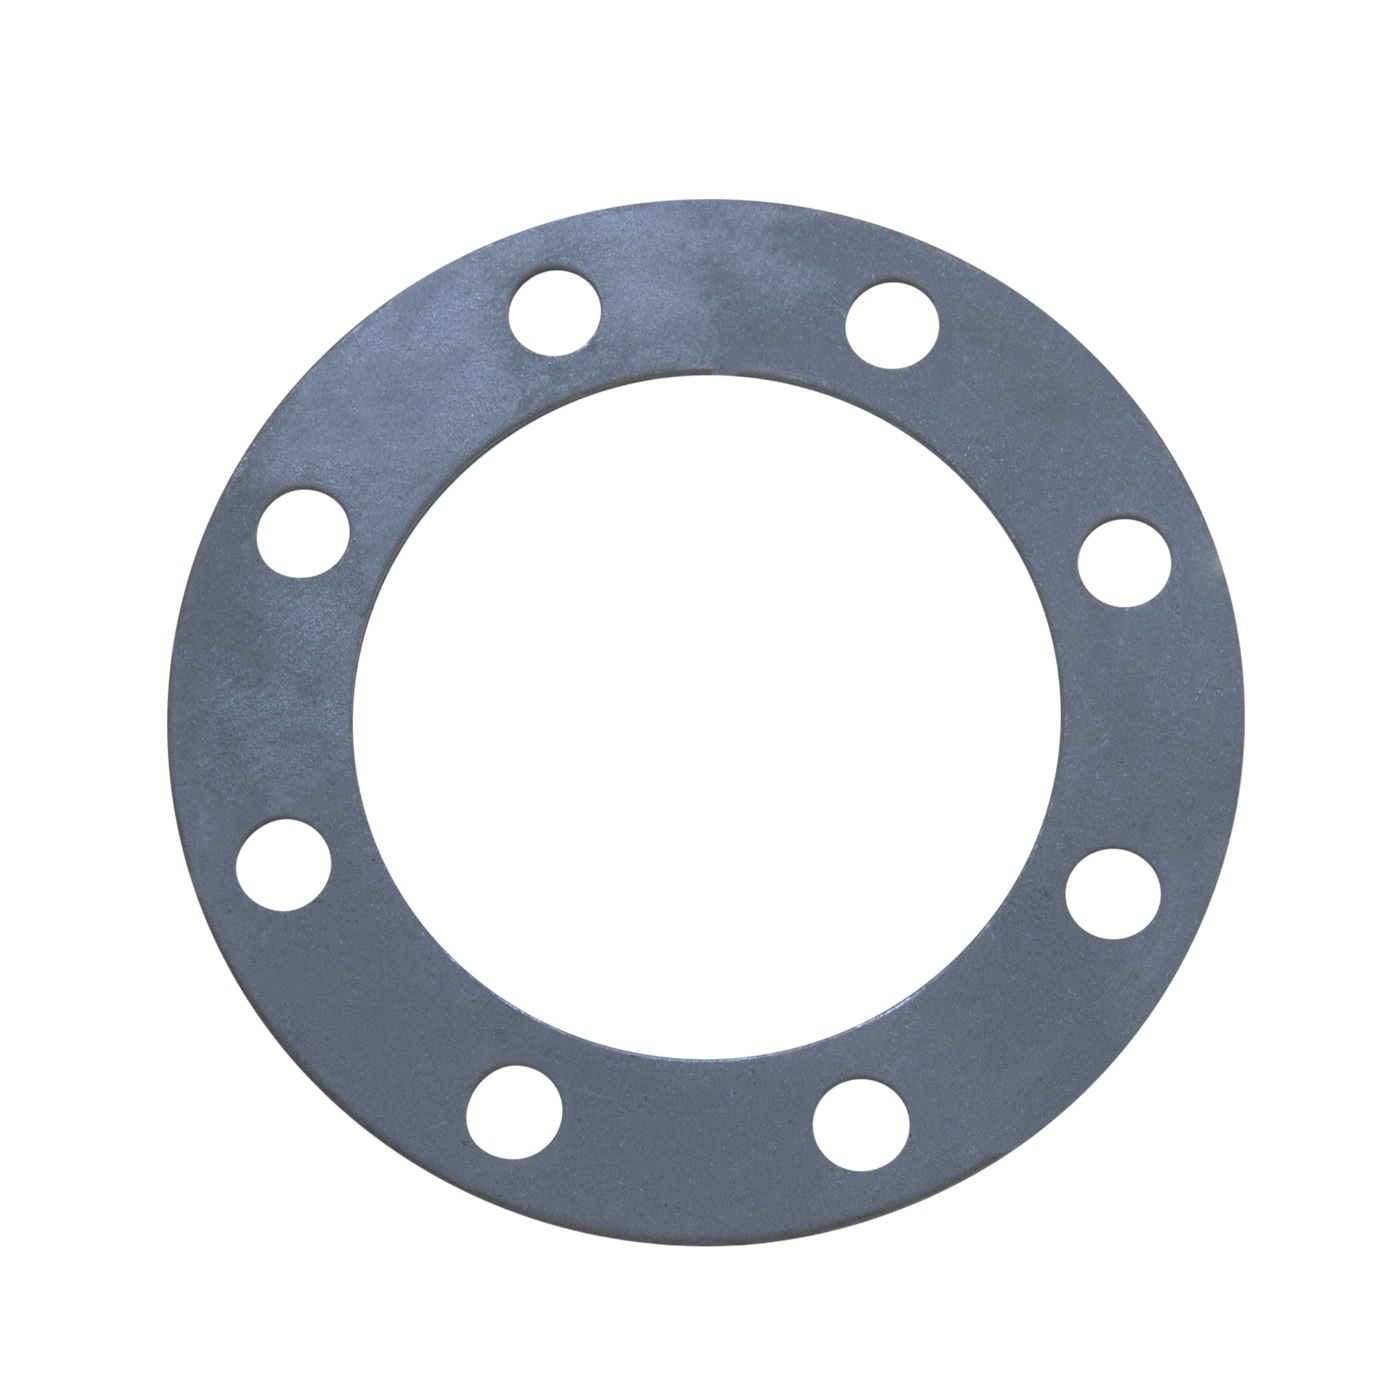 T100 & Tacoma standard side gear Thrust washer 1.60MM 